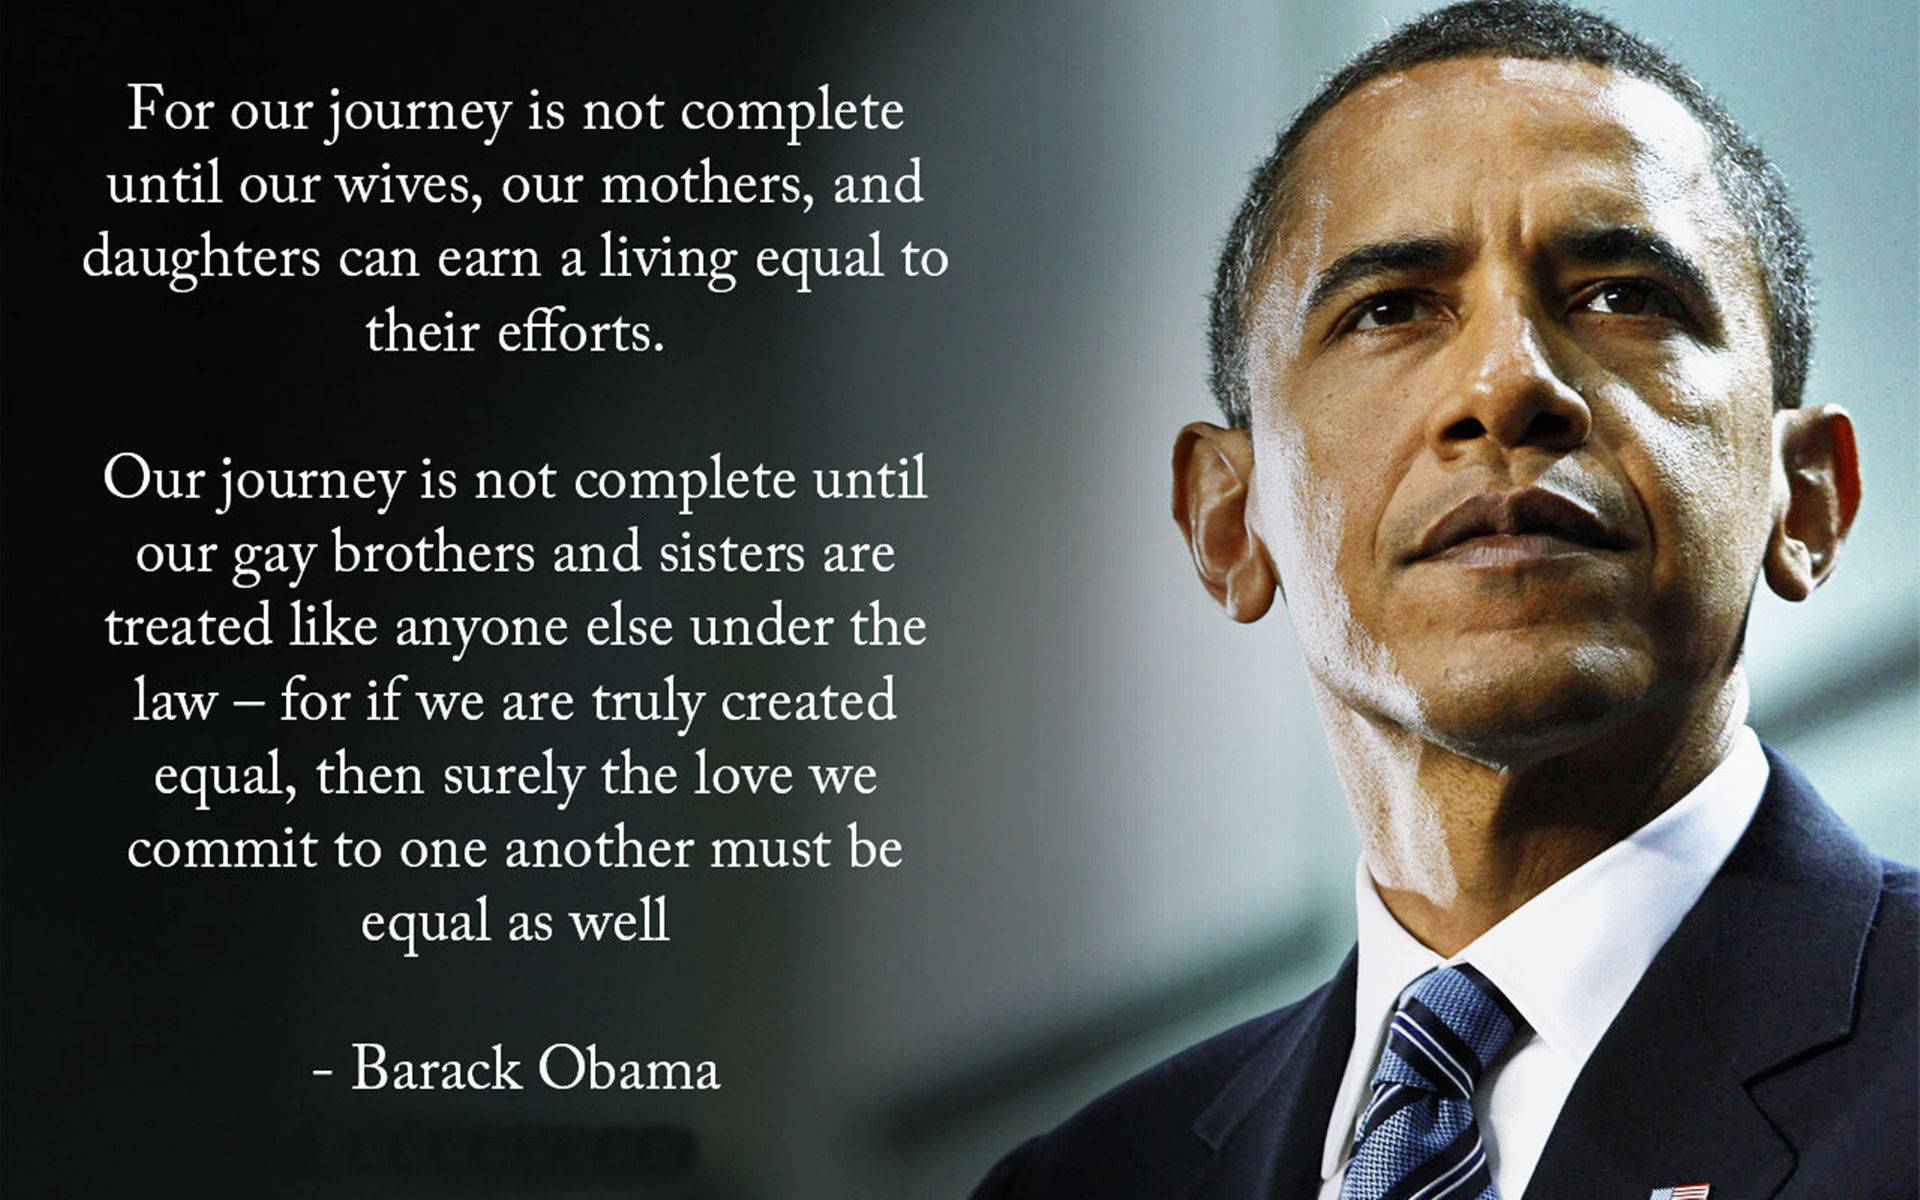 Barack Obama Quote From Speech Background